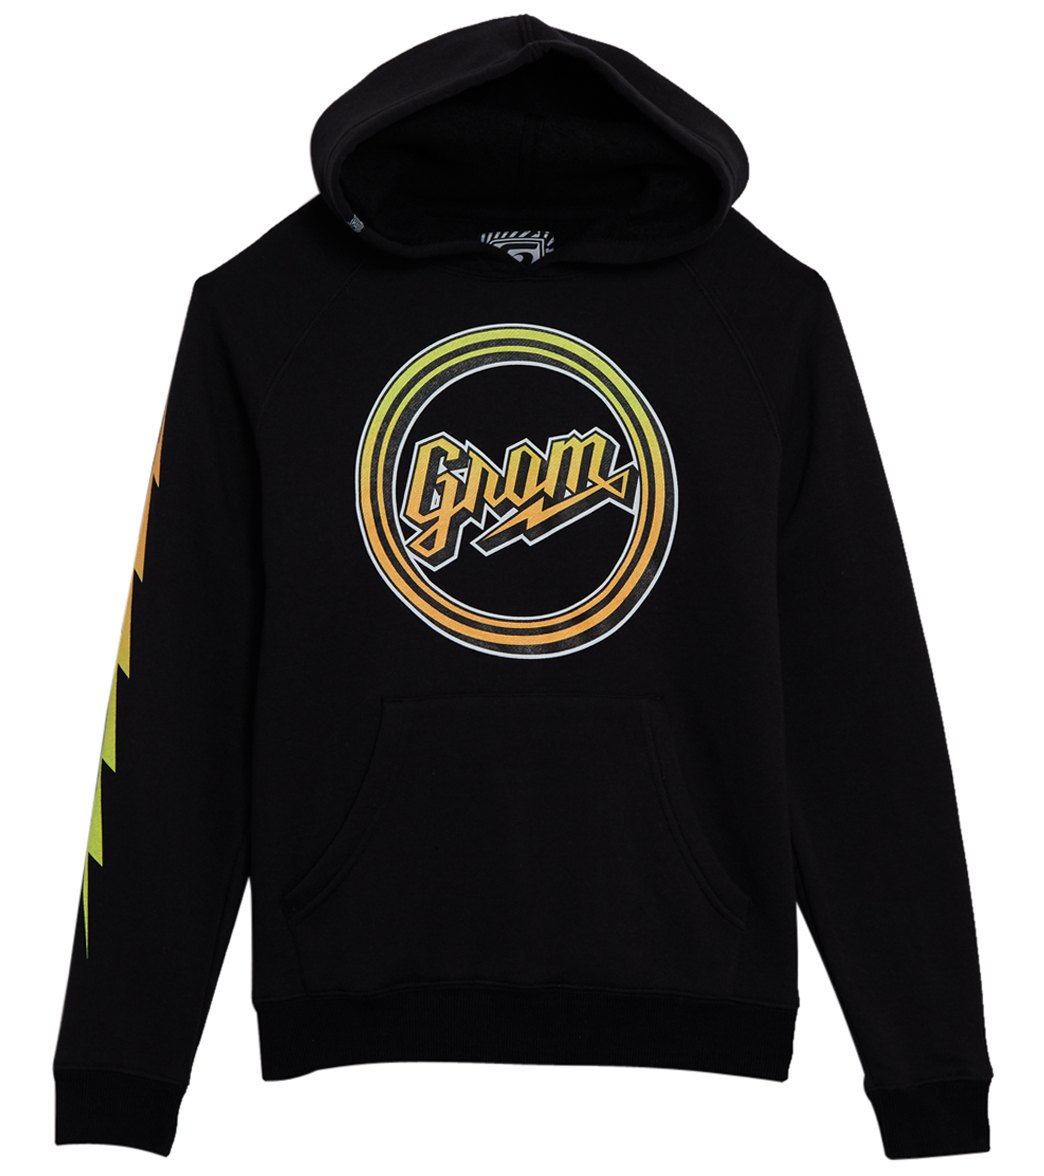 Grom Boys' Script Fade Pullover Hoodie - Black Small Cotton/Polyester - Swimoutlet.com